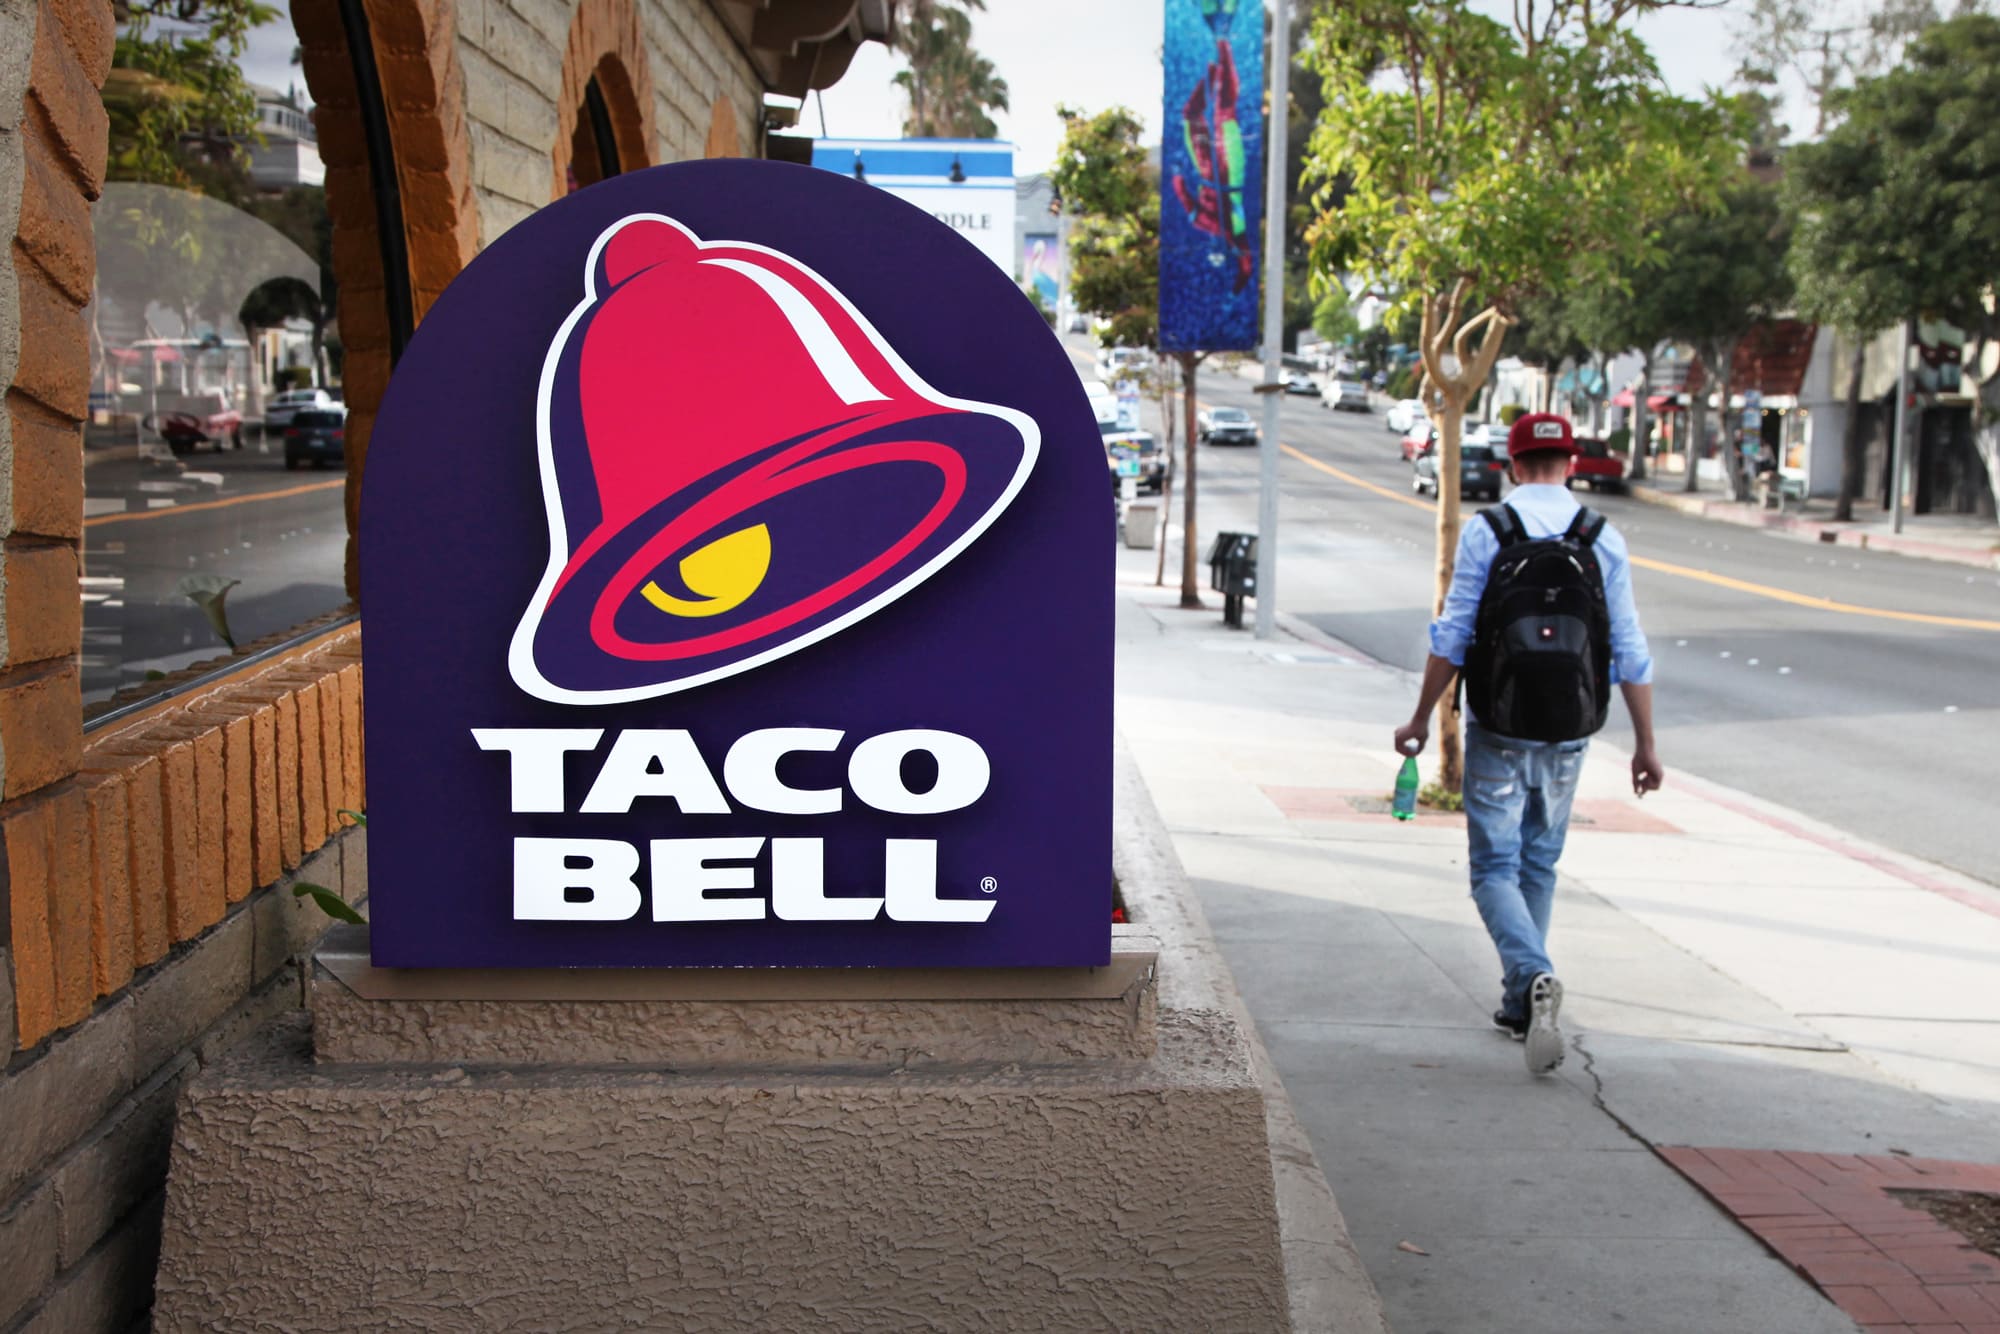 Yum Brands, owner of Taco Bell, buys AI business to improve marketing